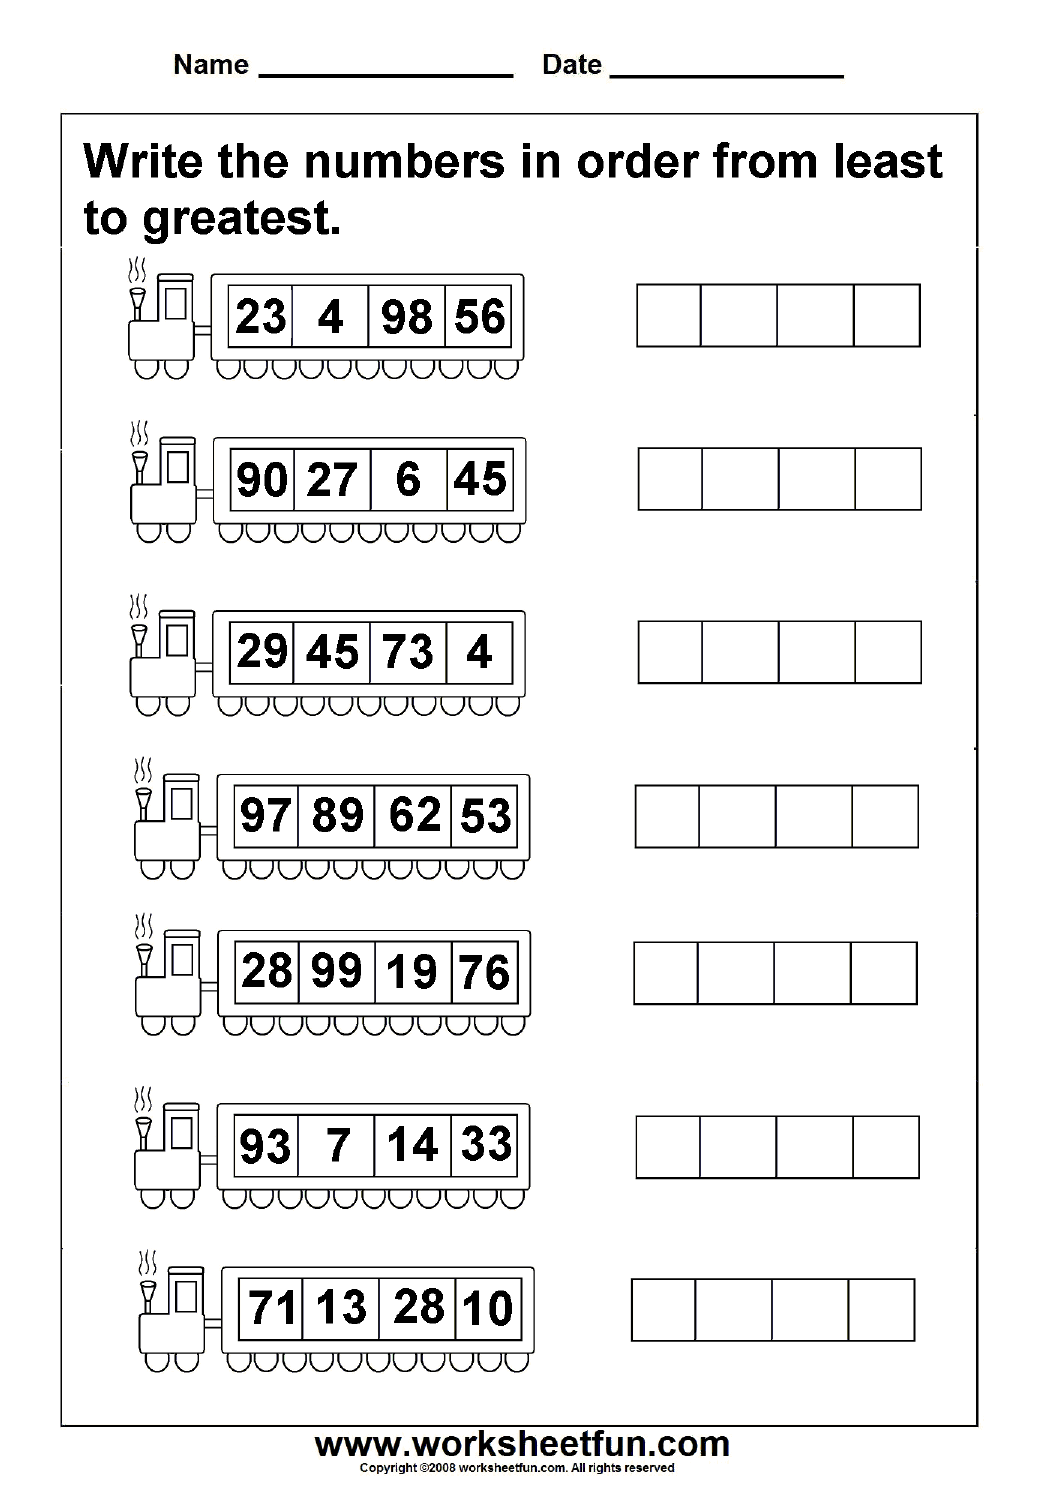 order-the-numbers-from-least-to-greatest-worksheets-worksheetscity